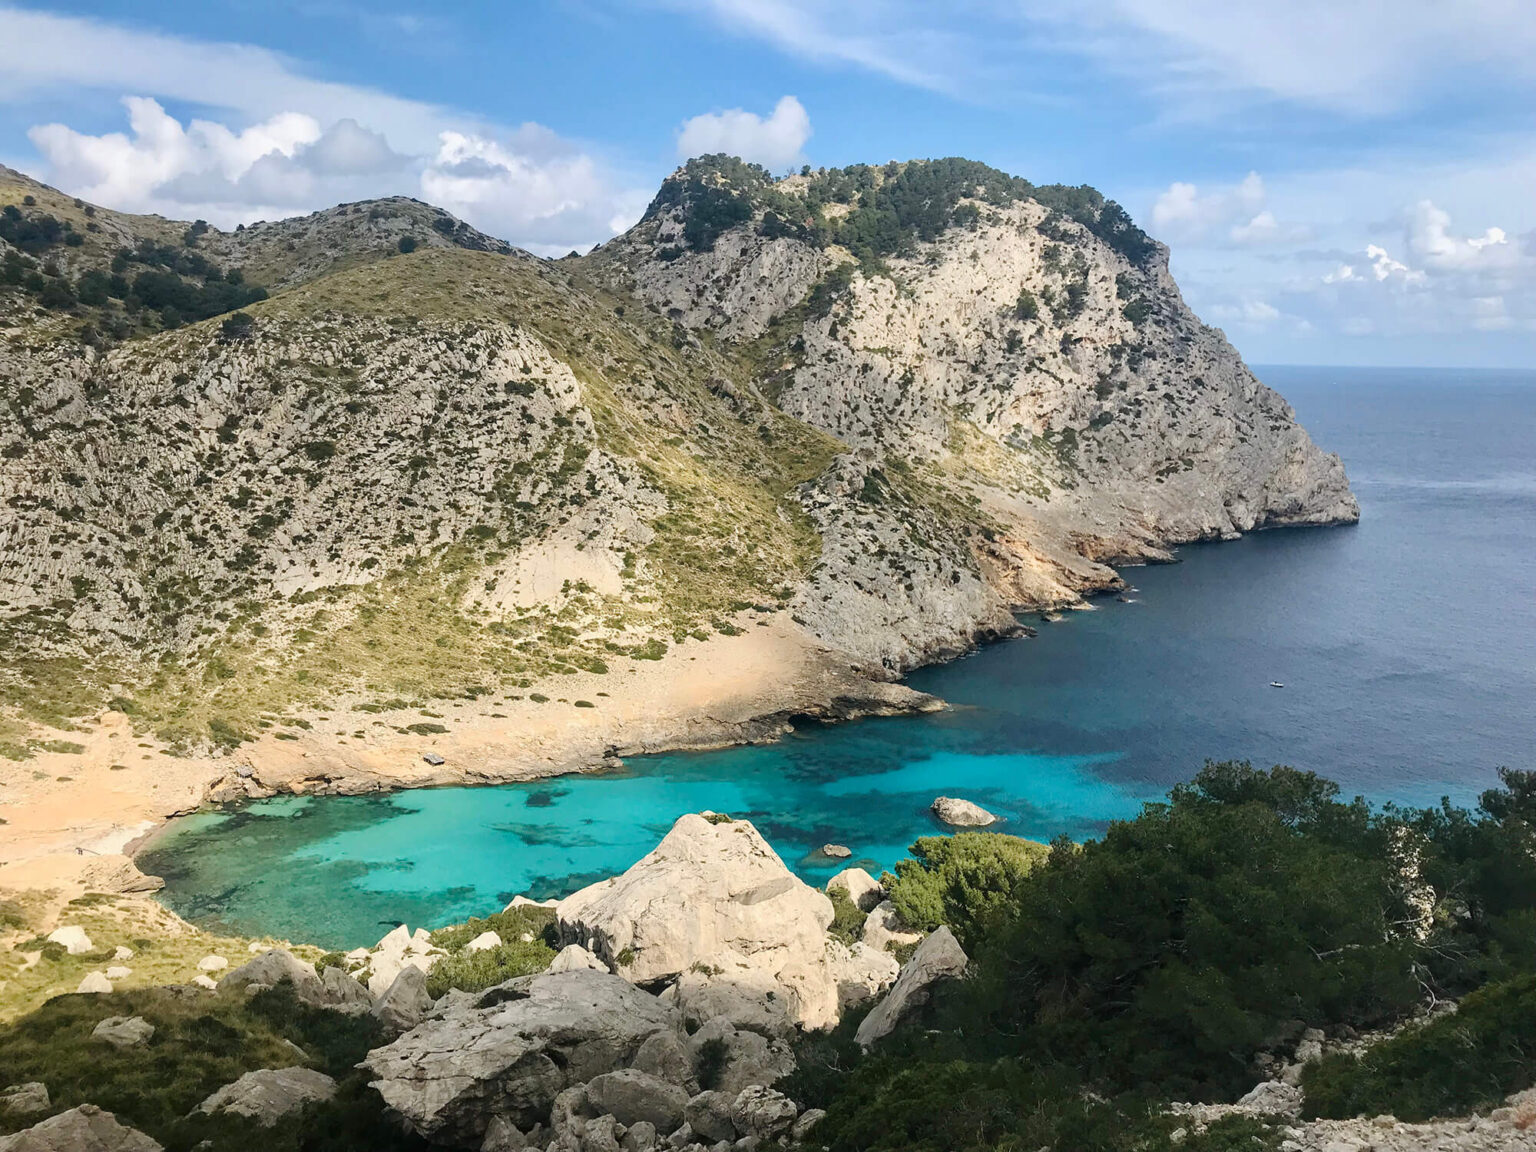 Hiking adventures and best spots to visit around Mallorca.